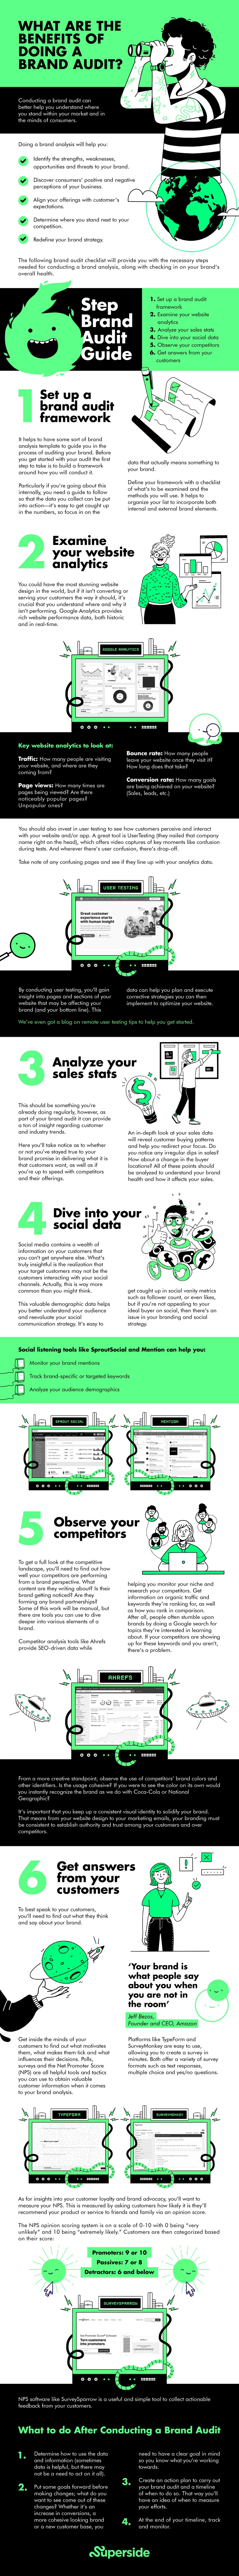 6 steps to a successful brand audit thatll help improve your marketing infographic